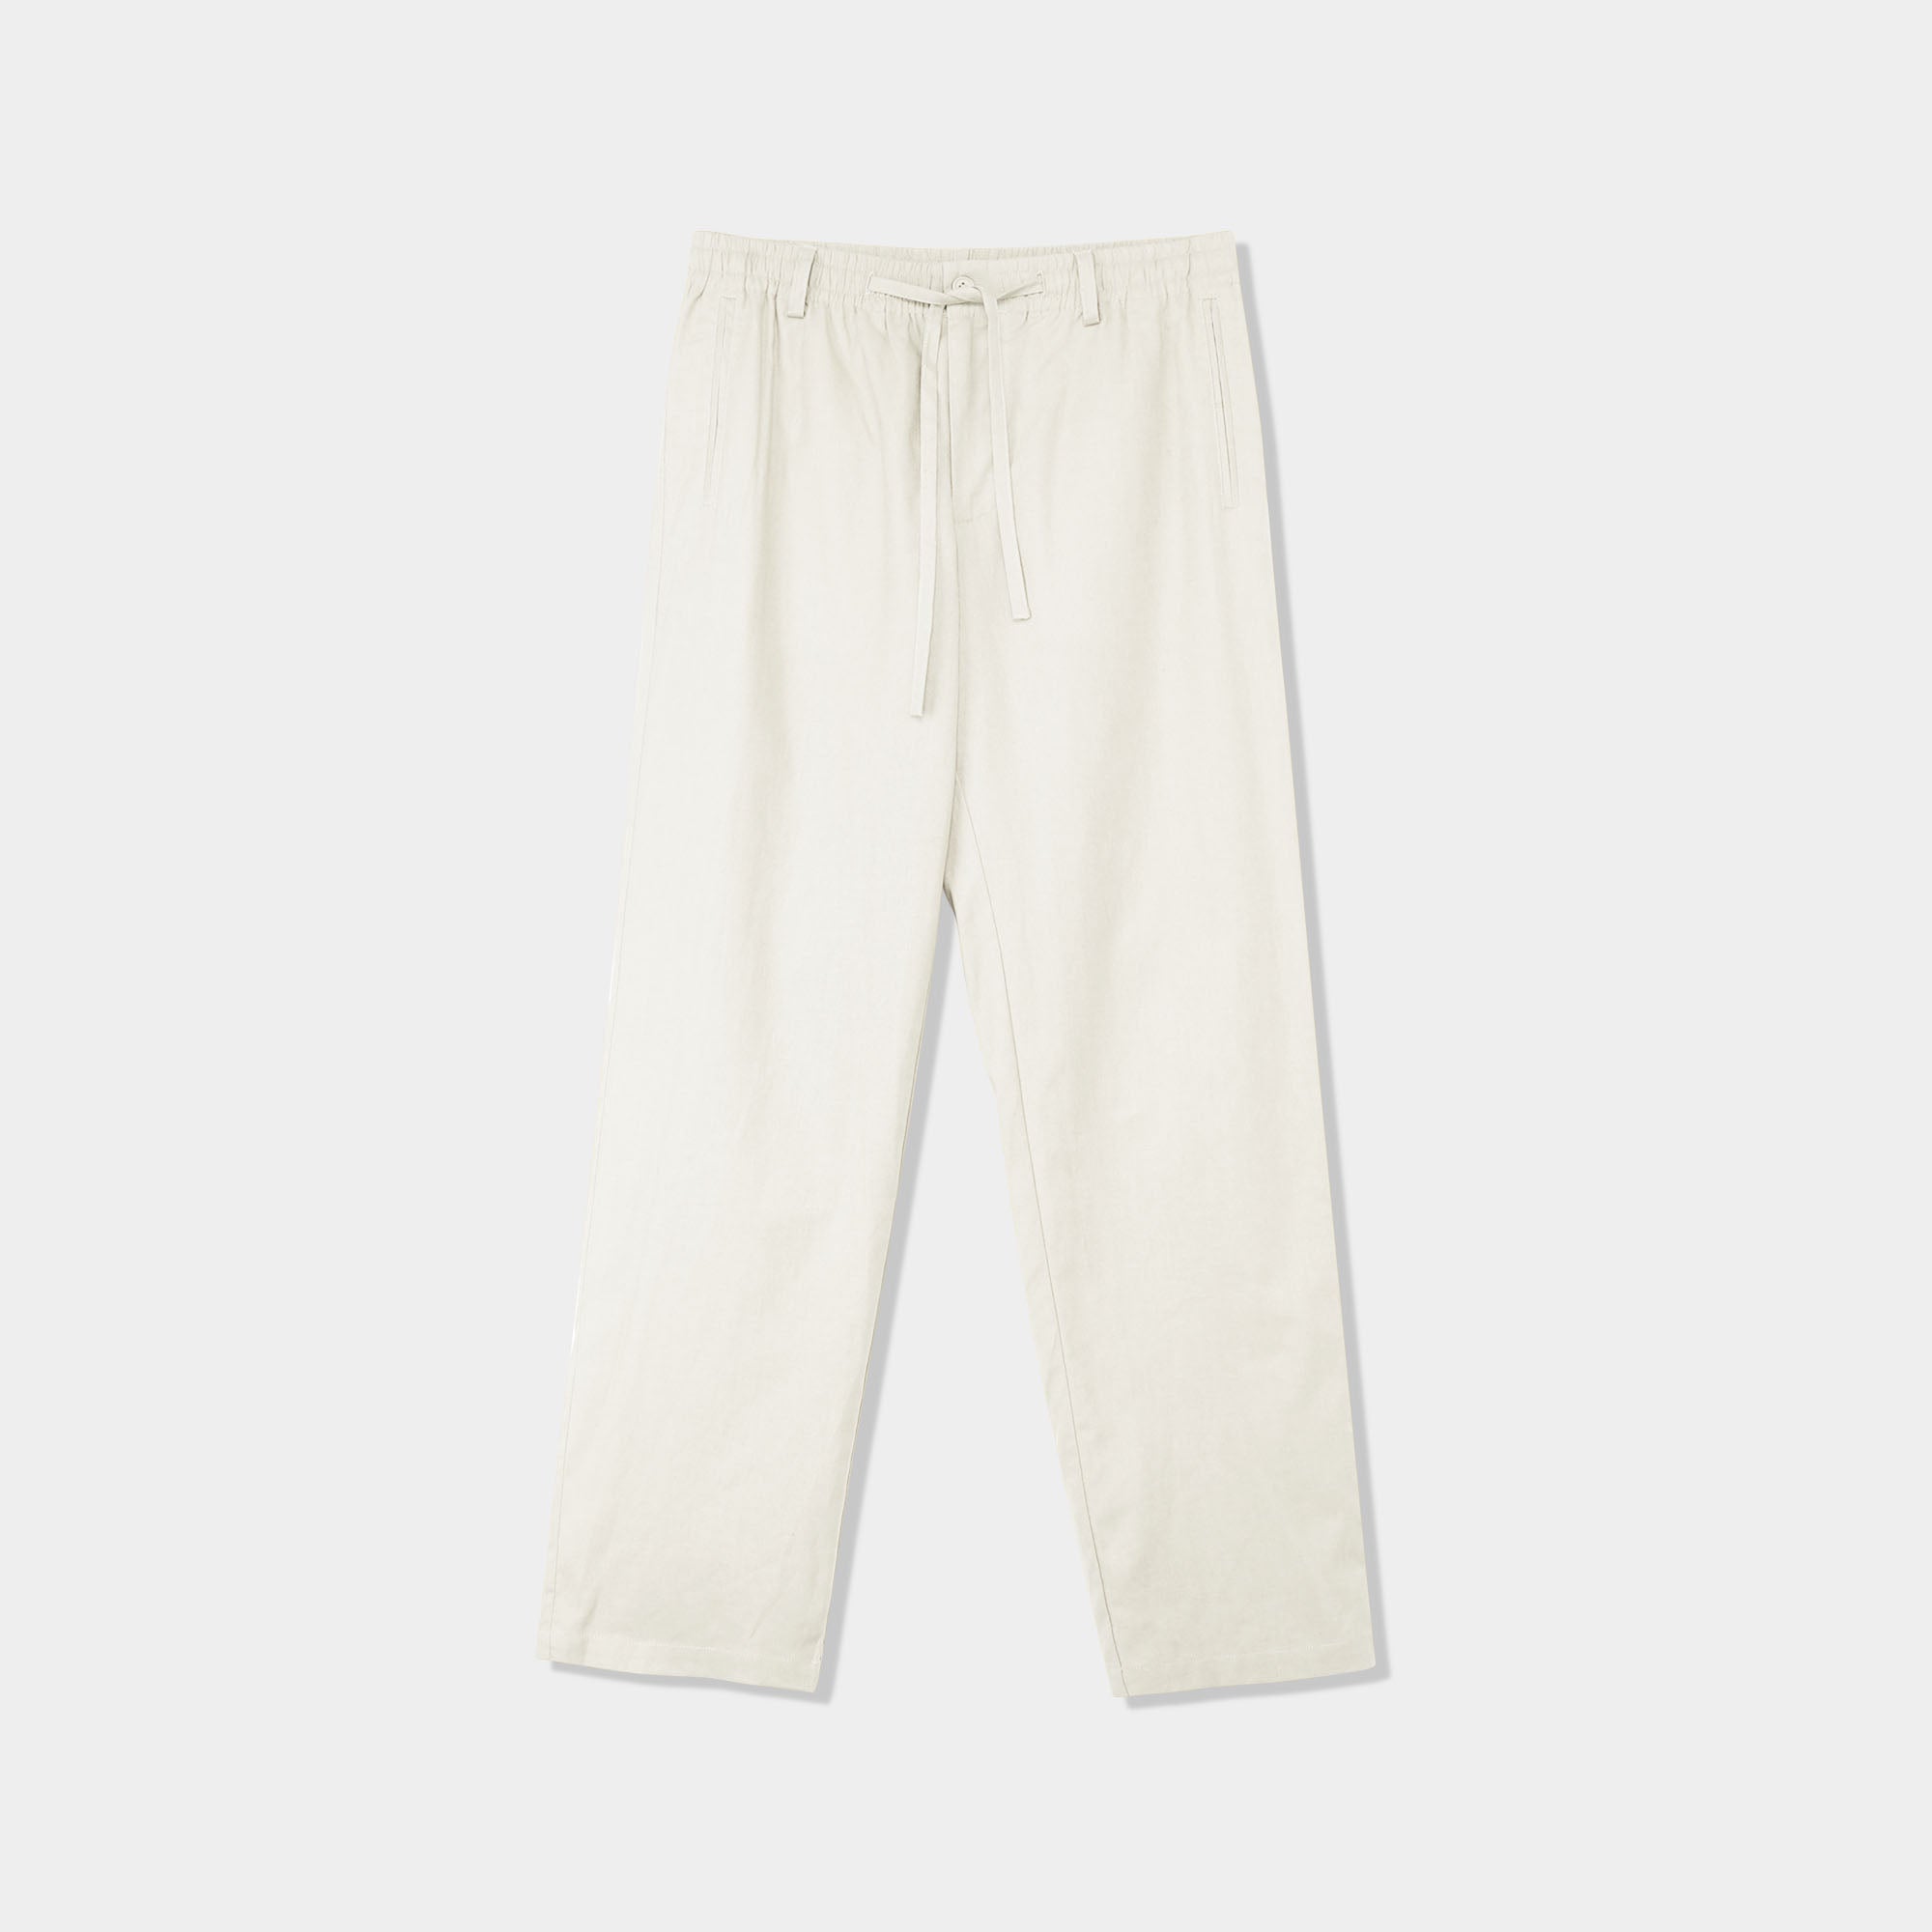 mens linen pants_linen_trousers_work at home_remote_formal business_casual_missy_old navy_wide leg_plus size_petite_linen_blend pants_cotton_macys_zara_oceanside_beach_pants_roxy_romper_drawstring_summer_coverup_tote_resort pants_relax_organic_cotton_hawaii_clearance_Natural Linen